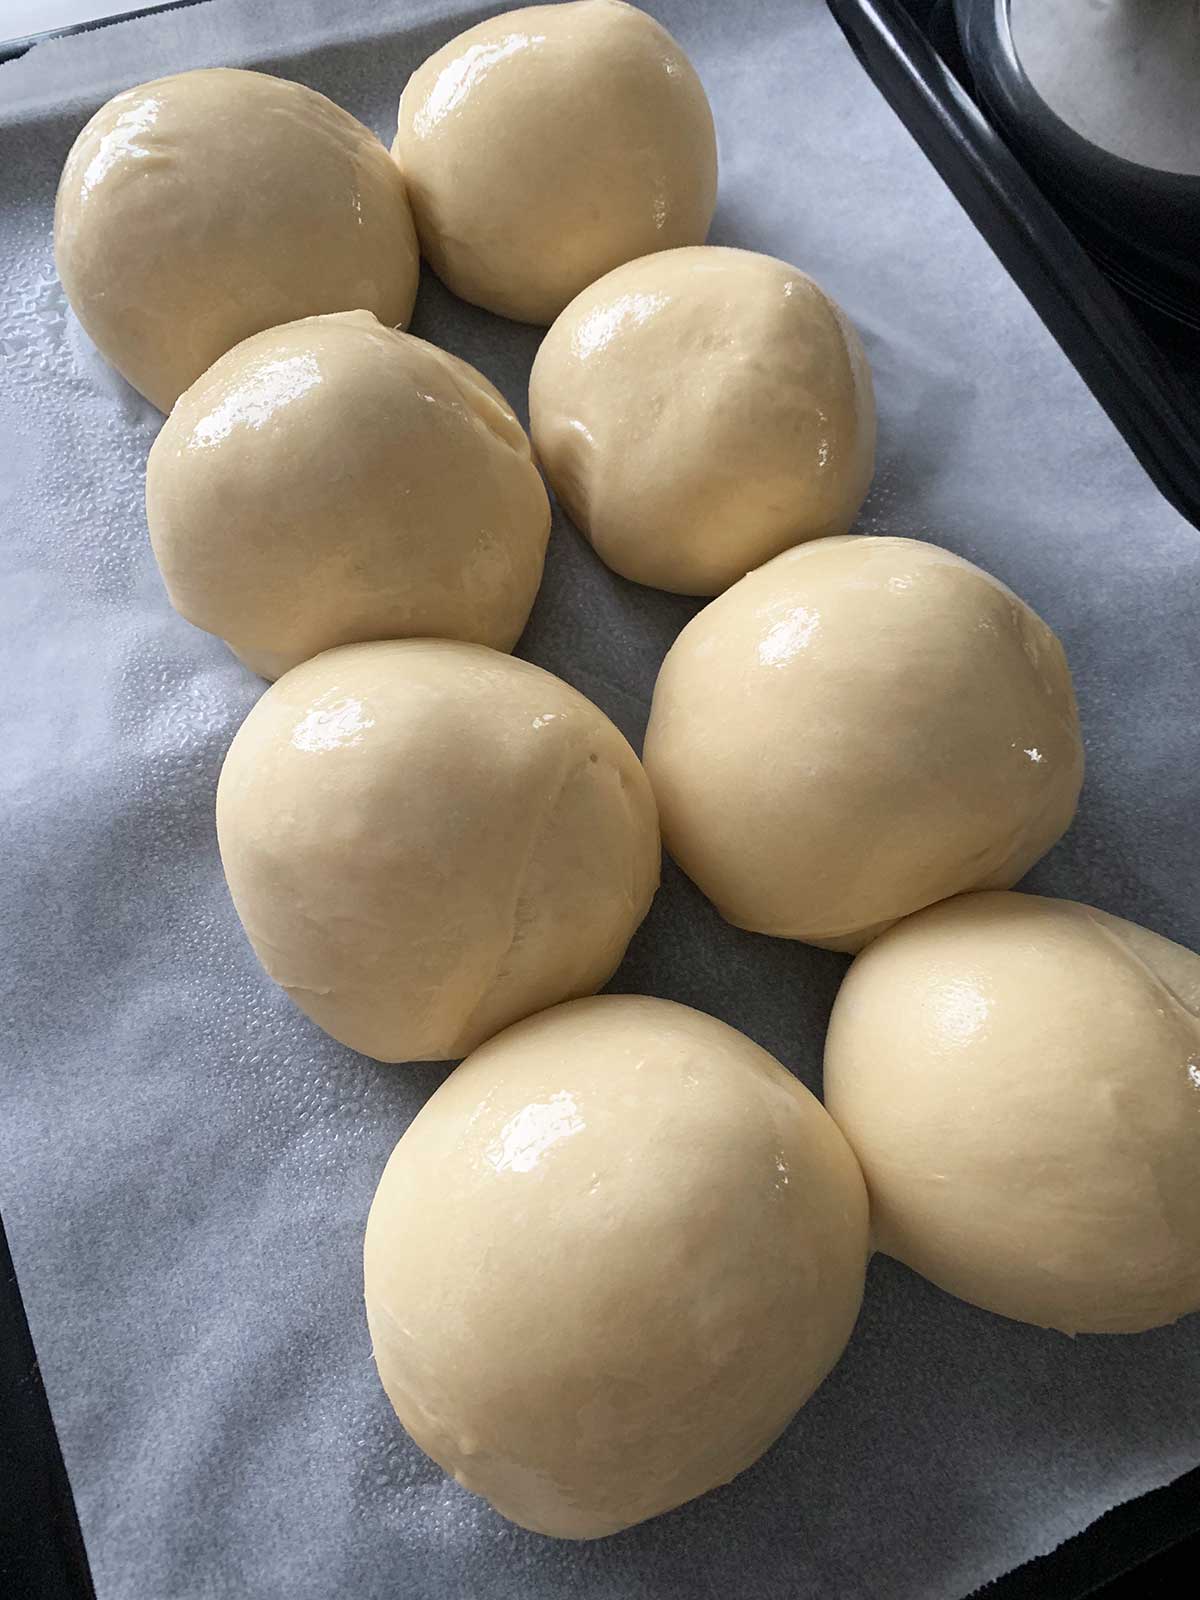 Dough balls coated in coconut oil ready to bake into dinner rolls